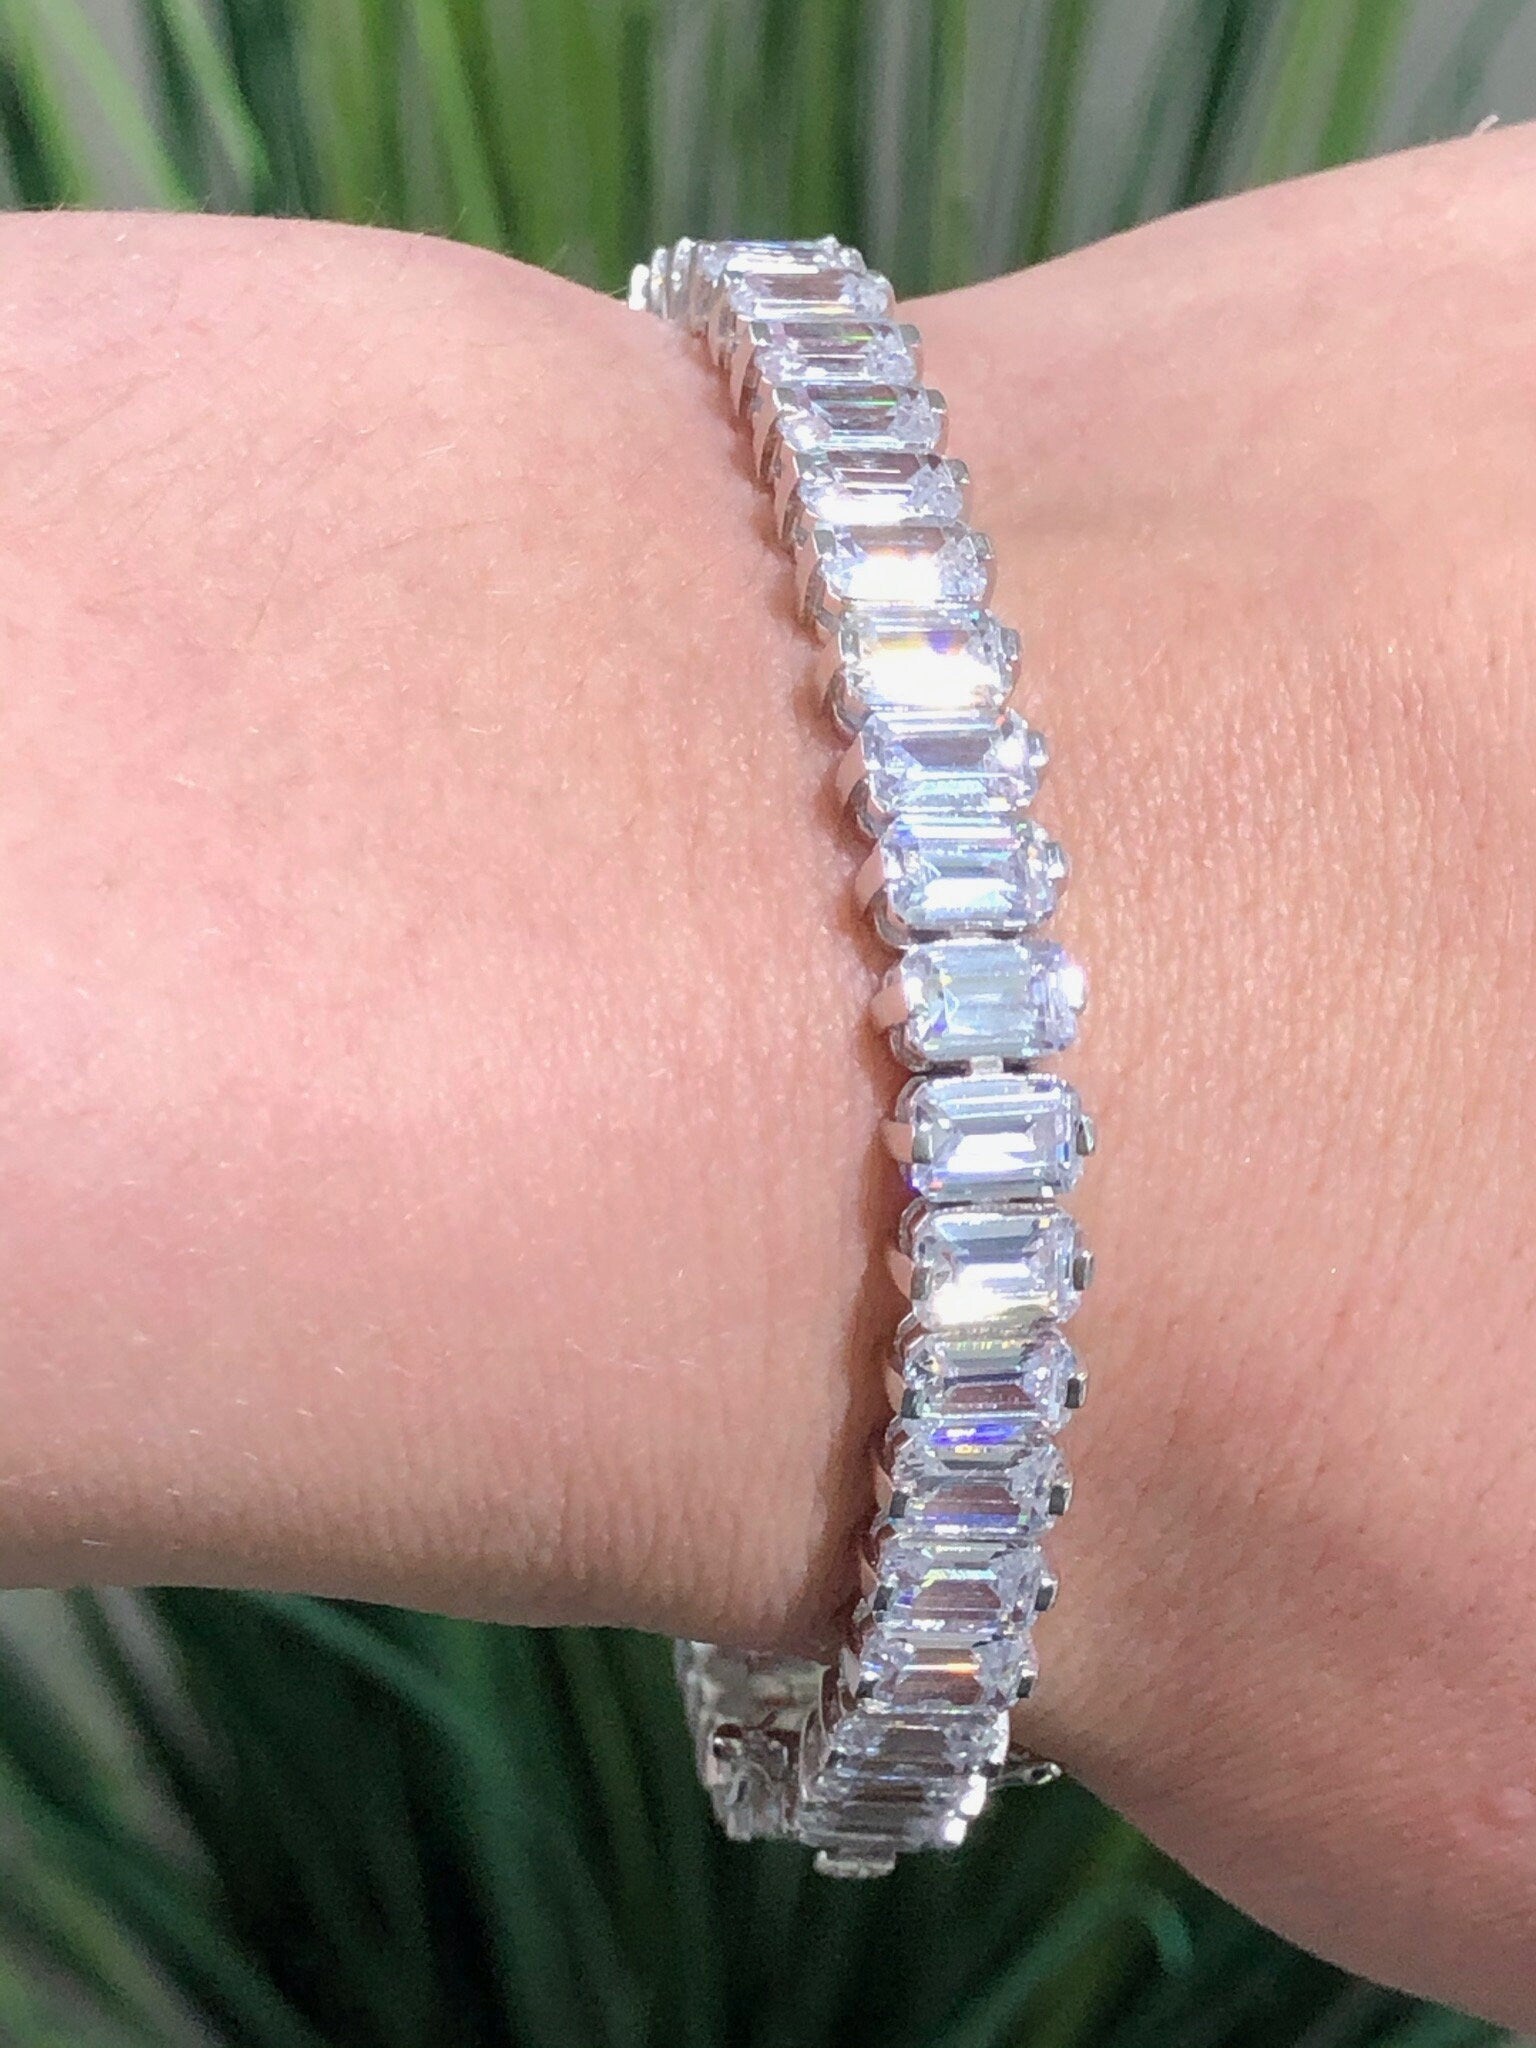 LIV Platinum over Sterling Silver Emerald Cut Tennis Bracelet With Hand Set Simulated Diamonds Bridal Travel Very Sparkly!